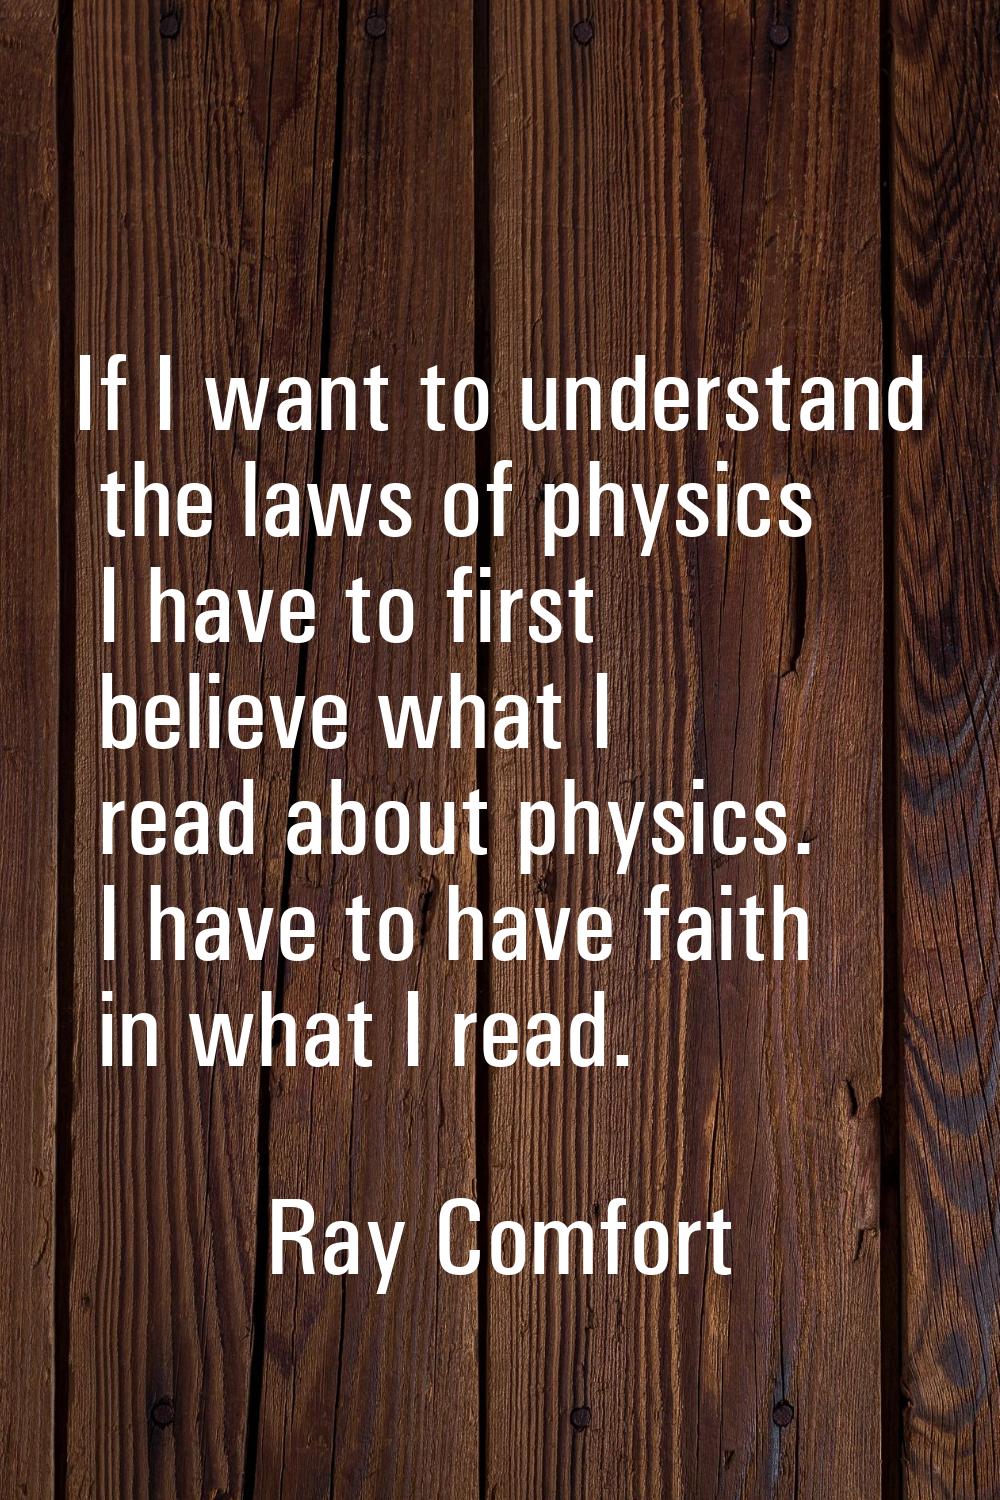 If I want to understand the laws of physics I have to first believe what I read about physics. I ha